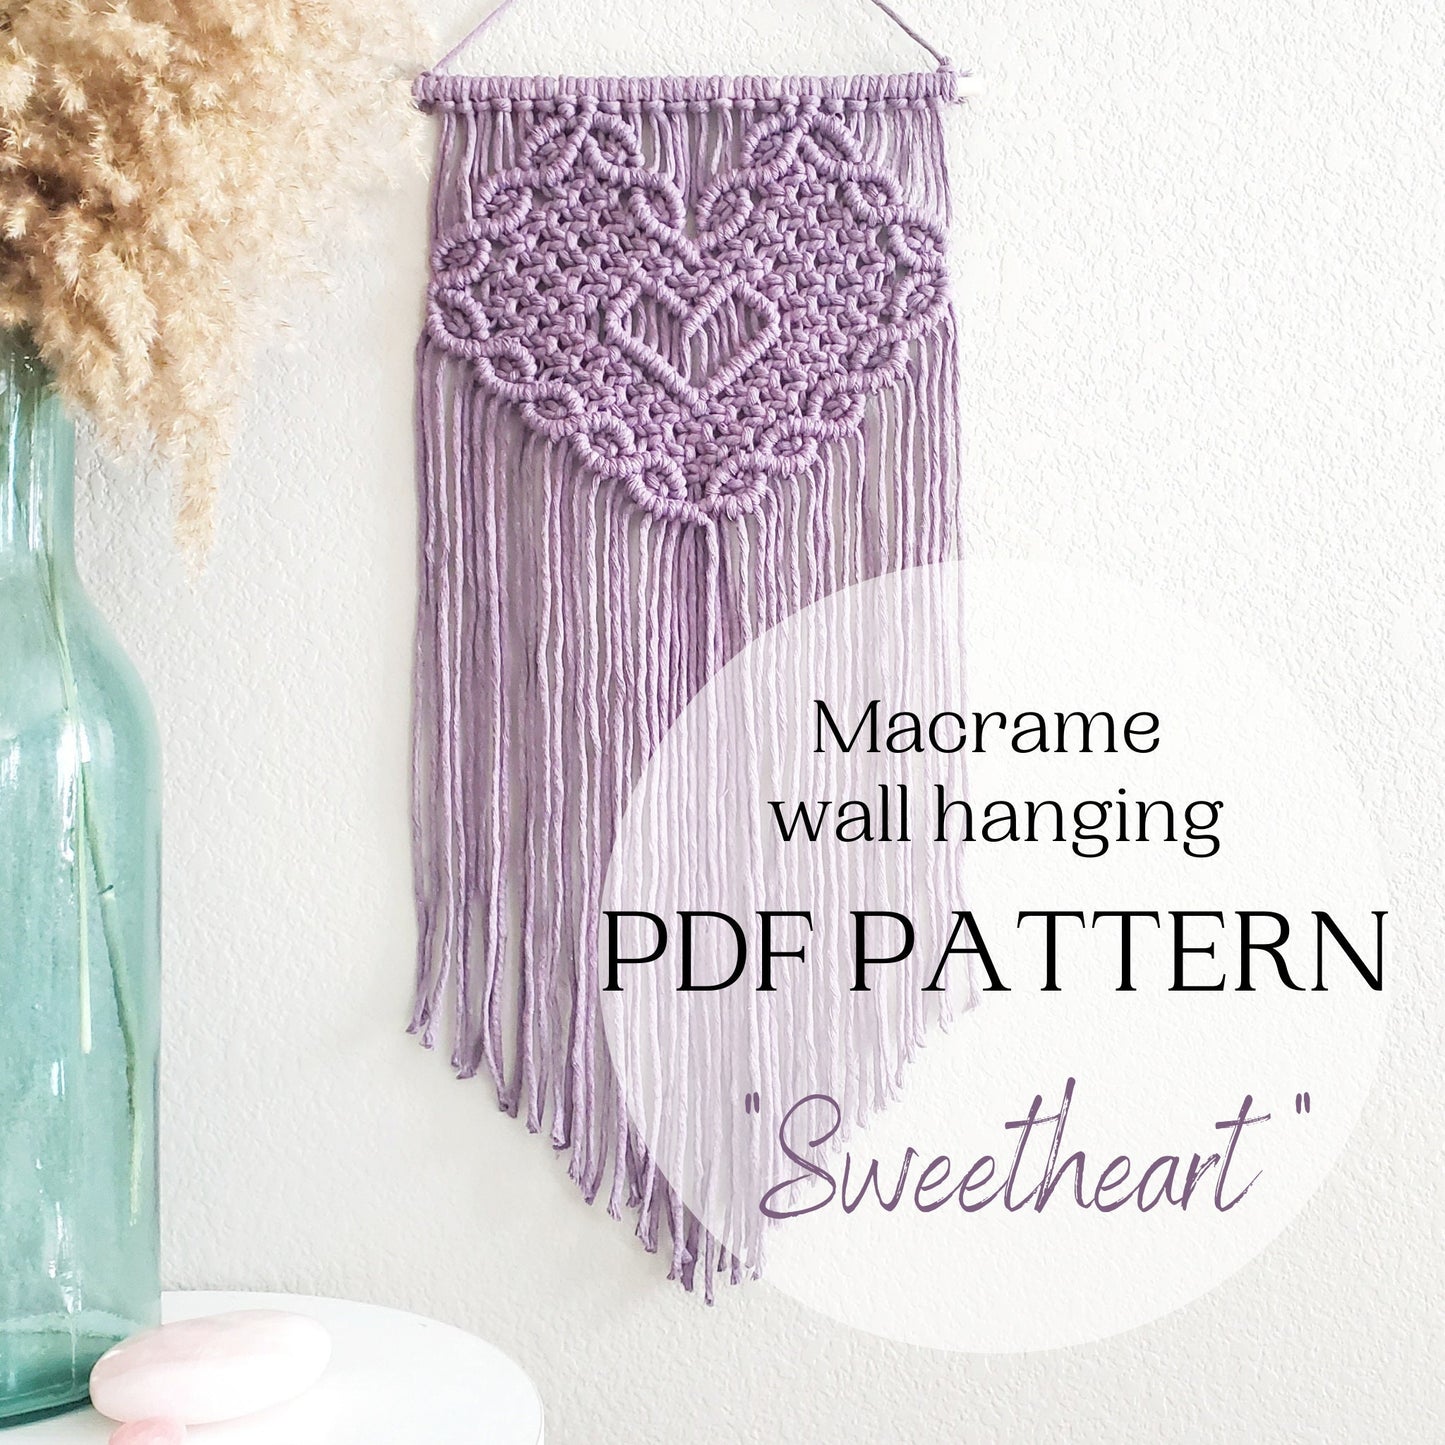 Macrame wall hanging pdf pattern, step by step guide, macrame tutorial, valentines day heart craft, diy macrame